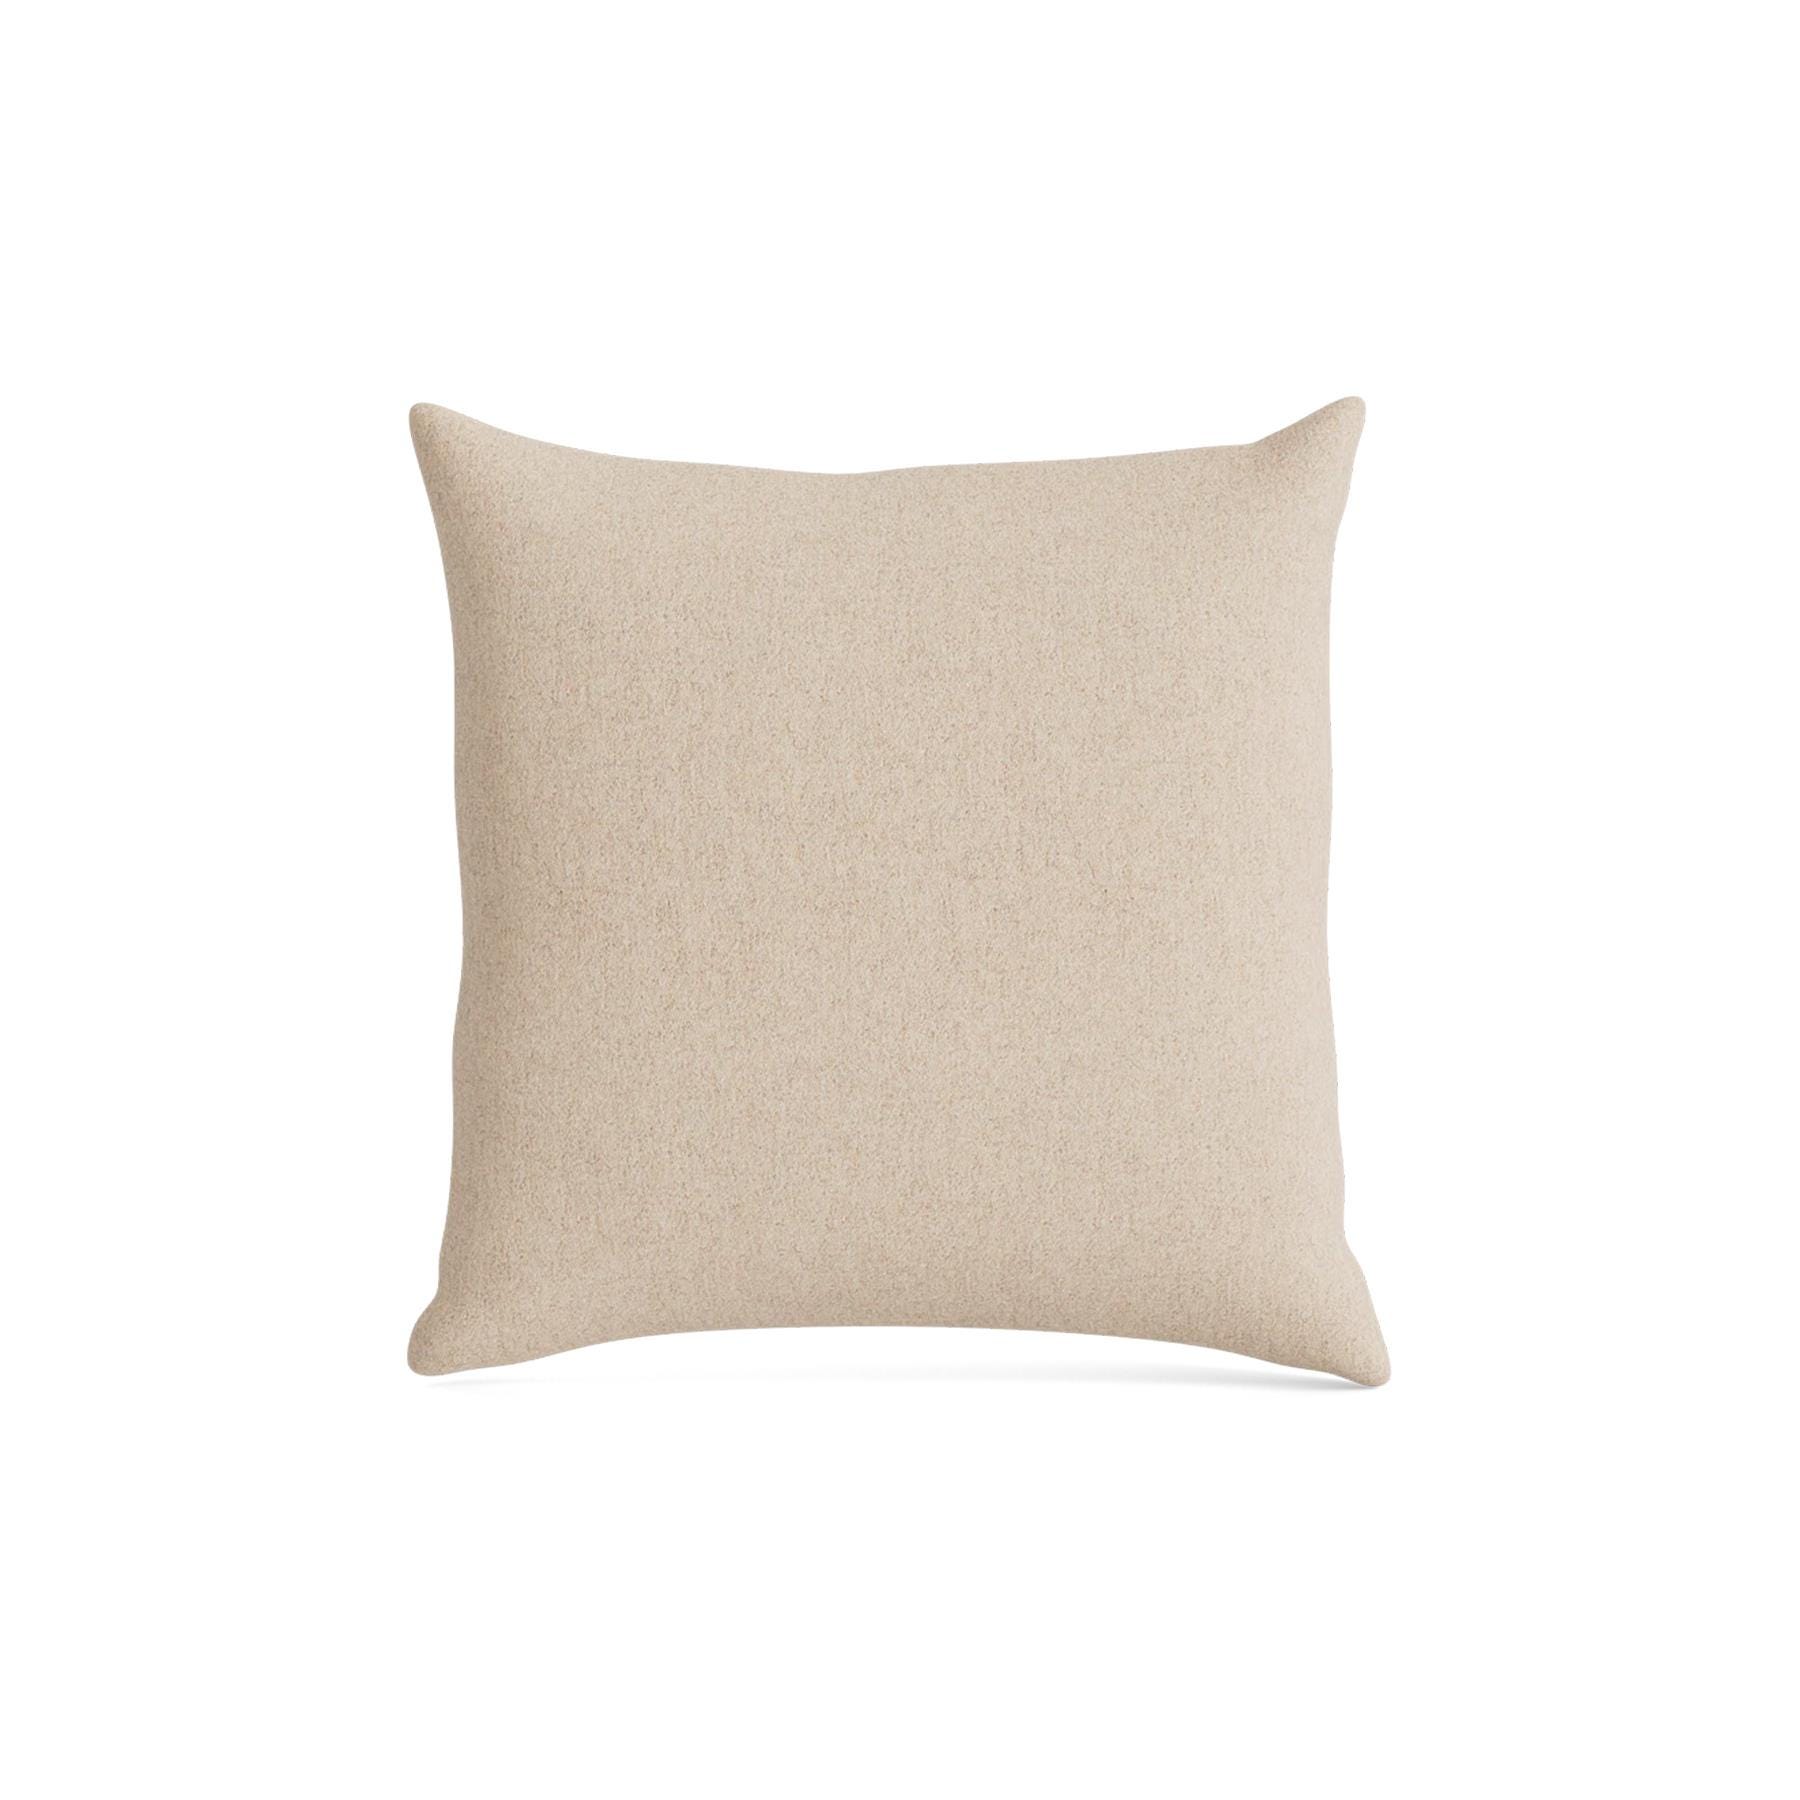 Make Nordic Pillow 40cmx40cm Wooly Sand 1037 Down And Fibers Cream